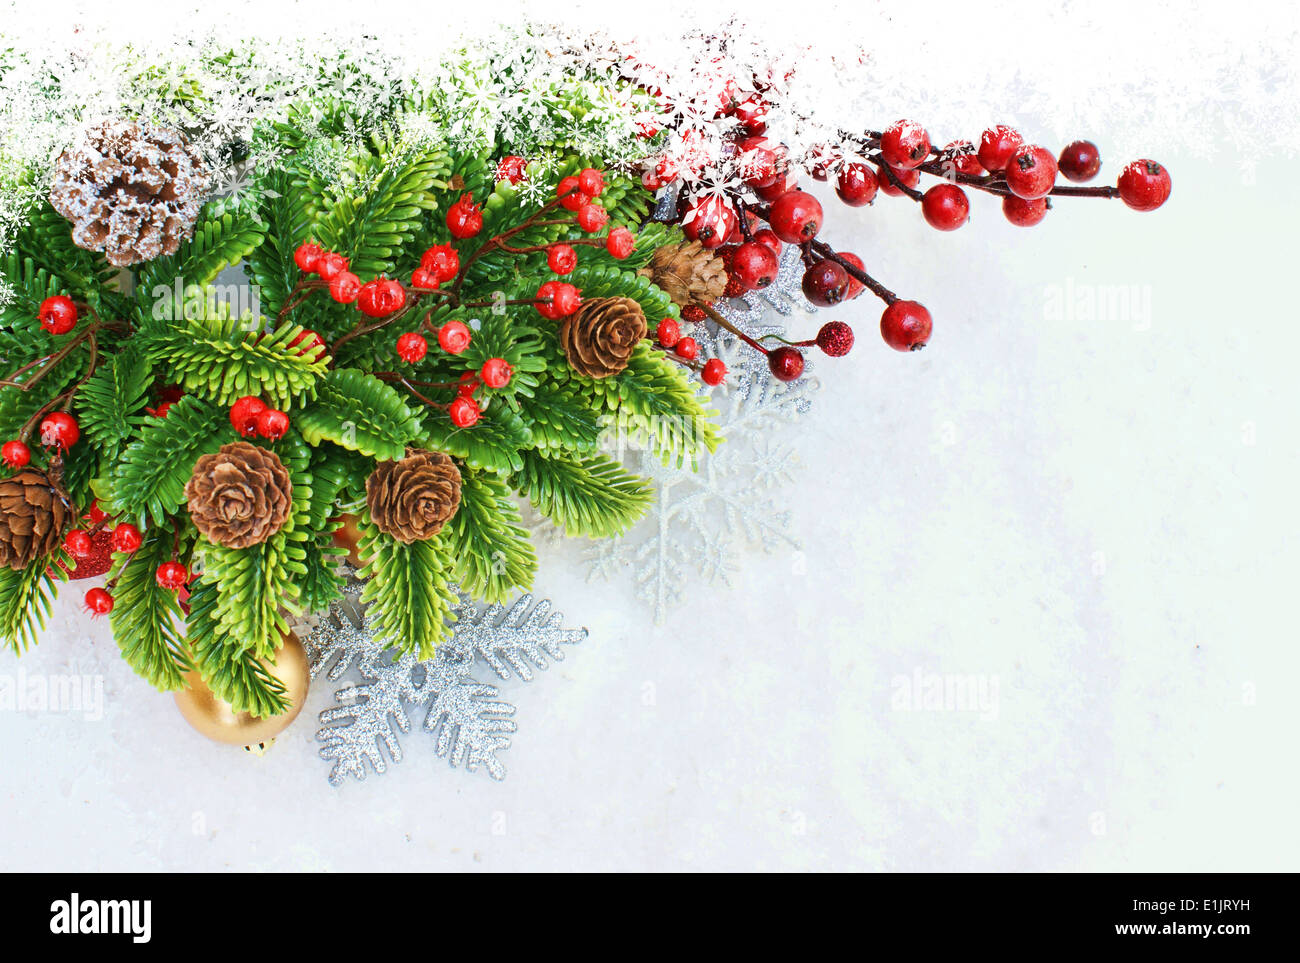 Christmas background with berries and snowflakes Stock Photo